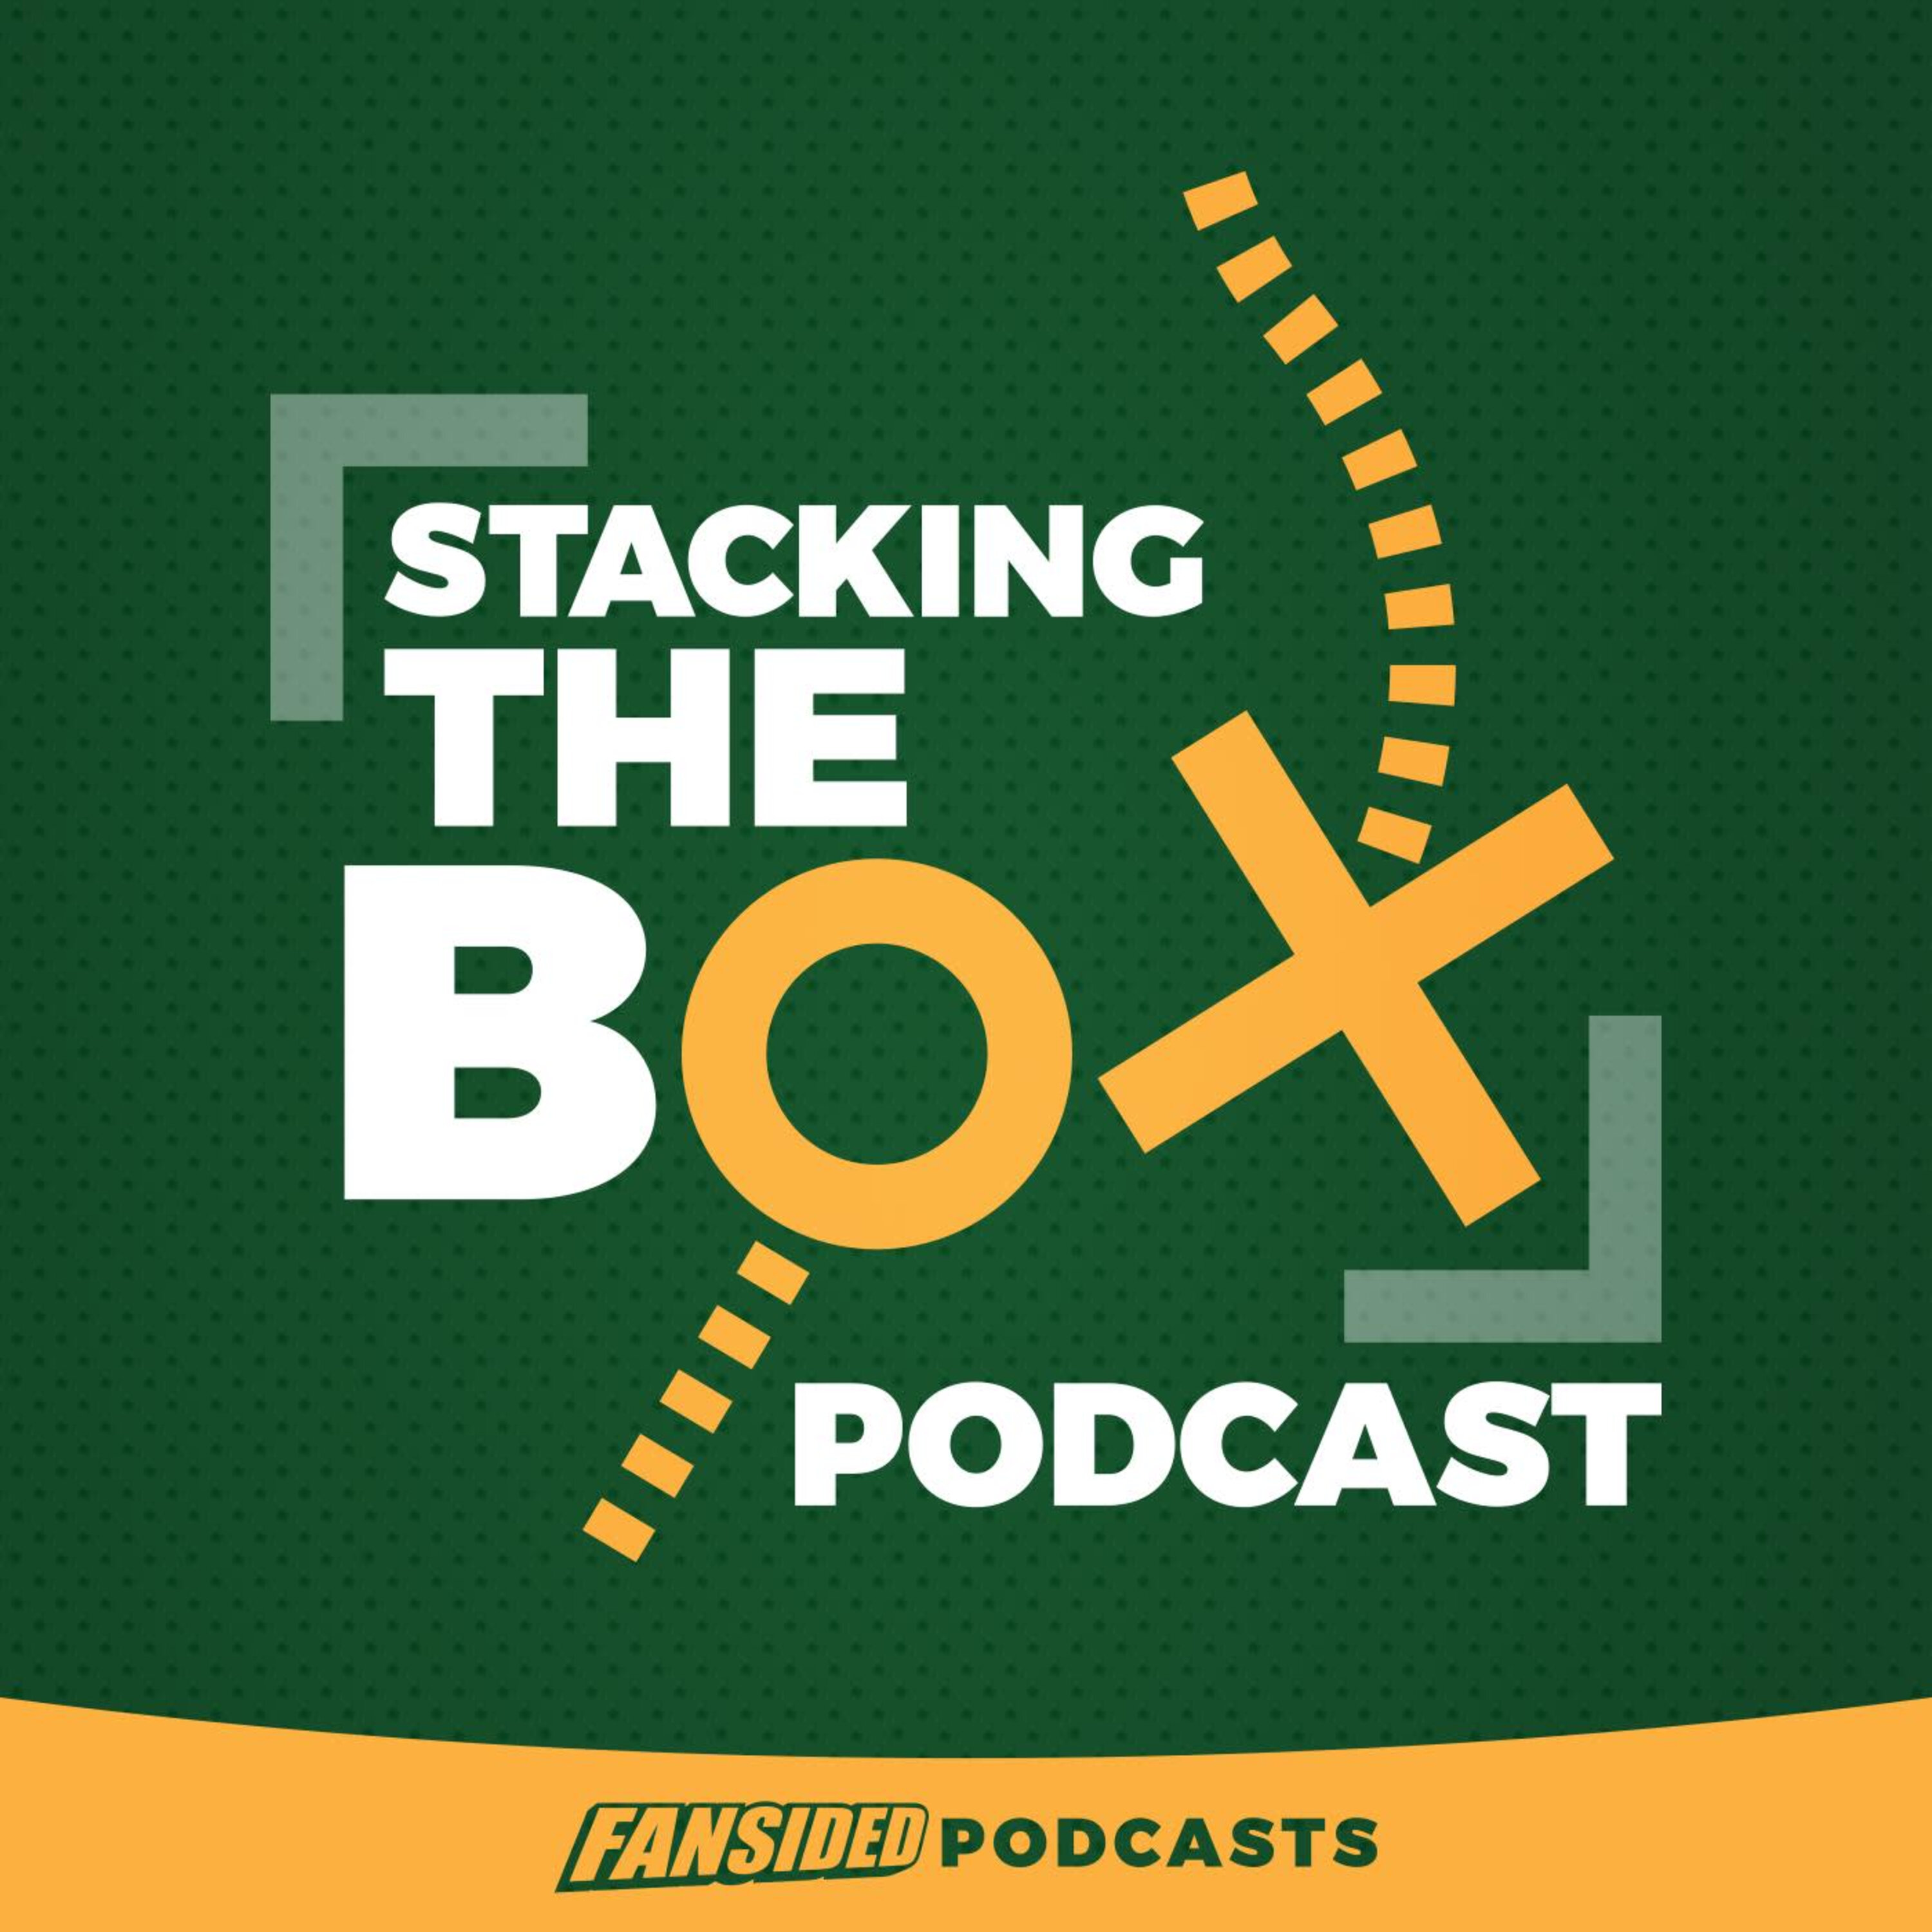 Stacking the Box - Podcast